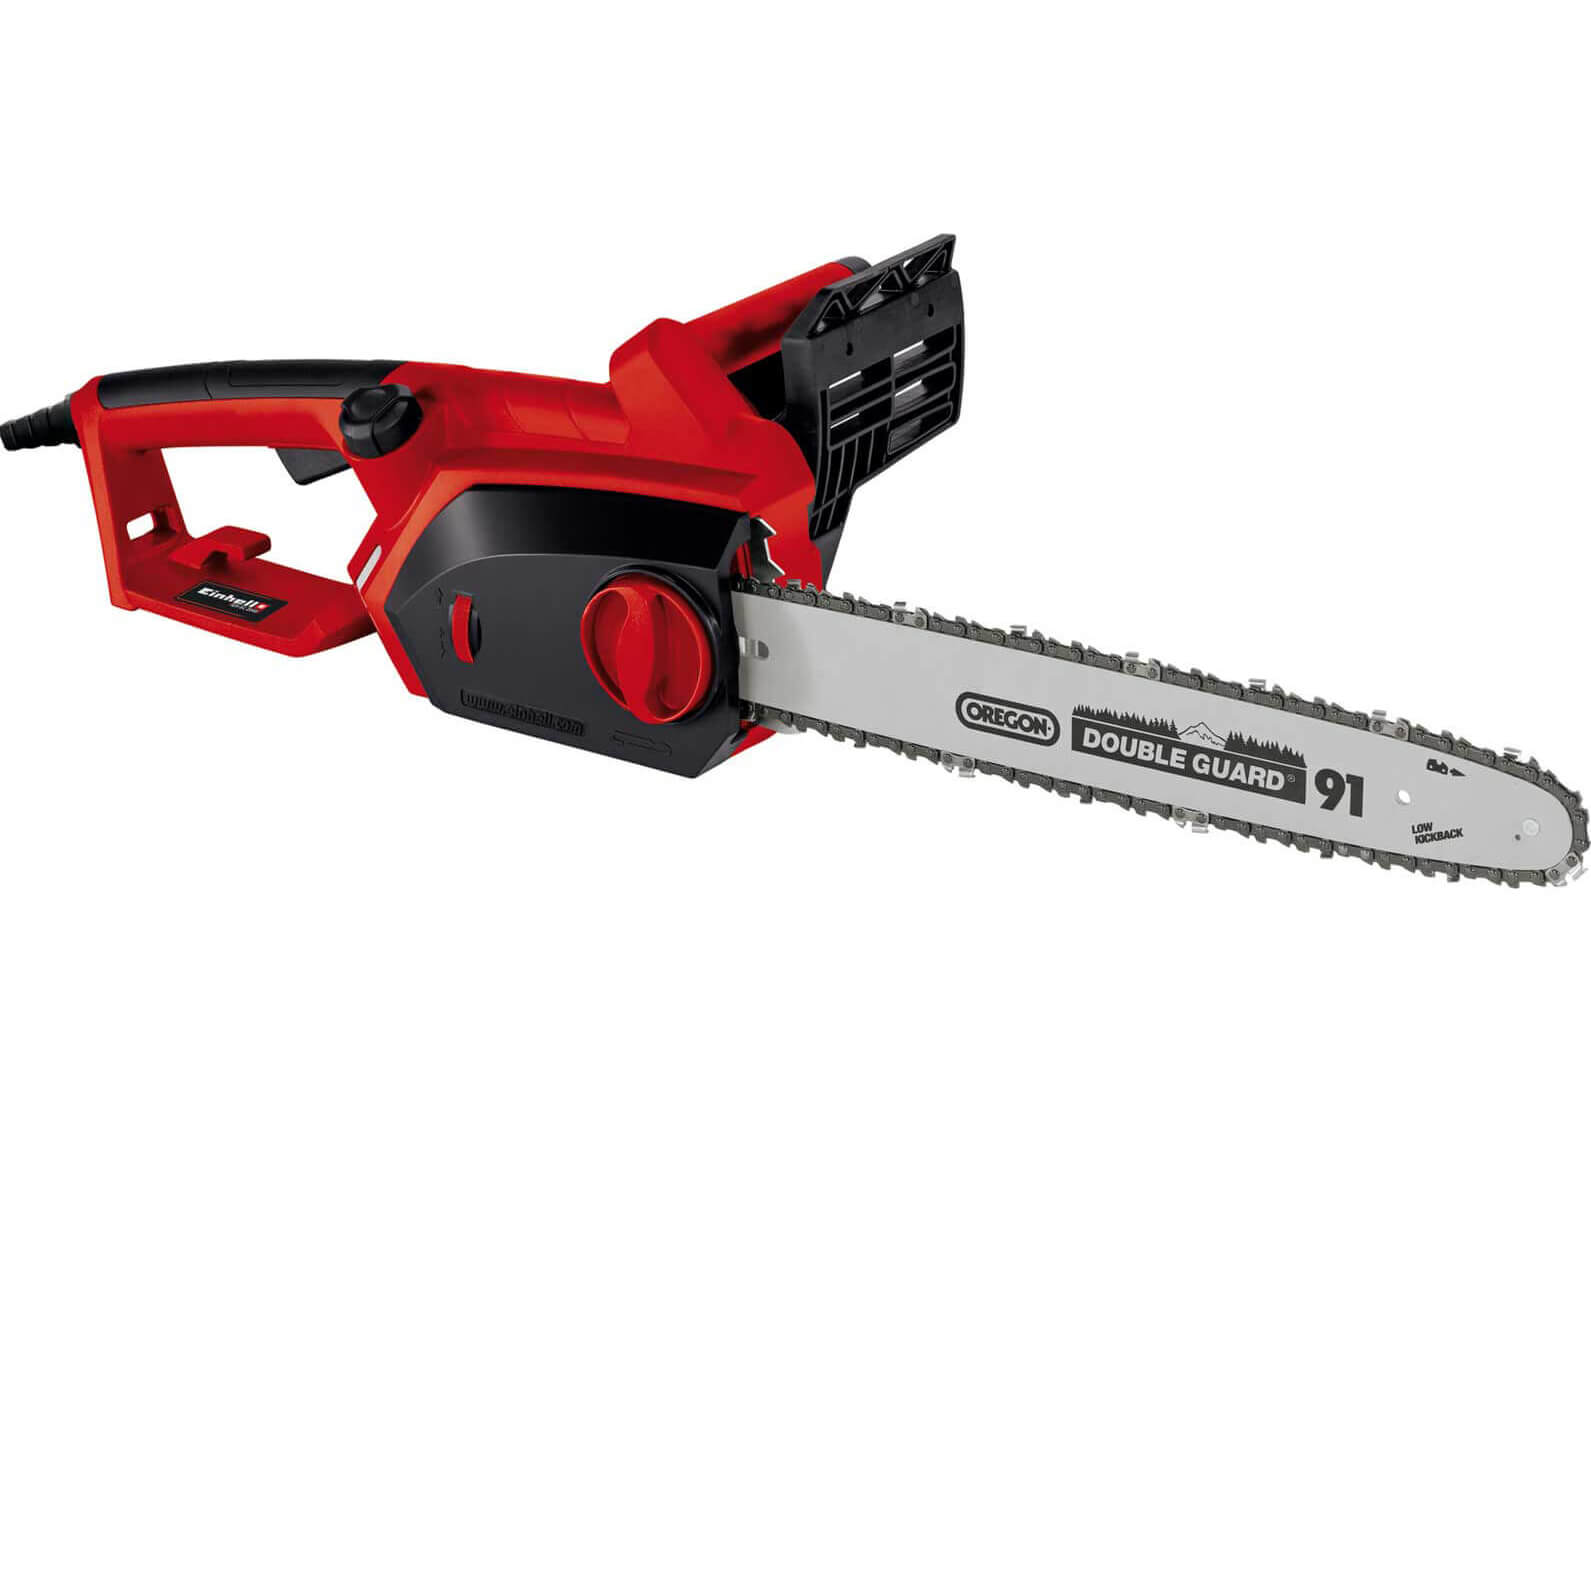 Image of Einhell GH-EC 2040 Electric Chainsaw 400mm